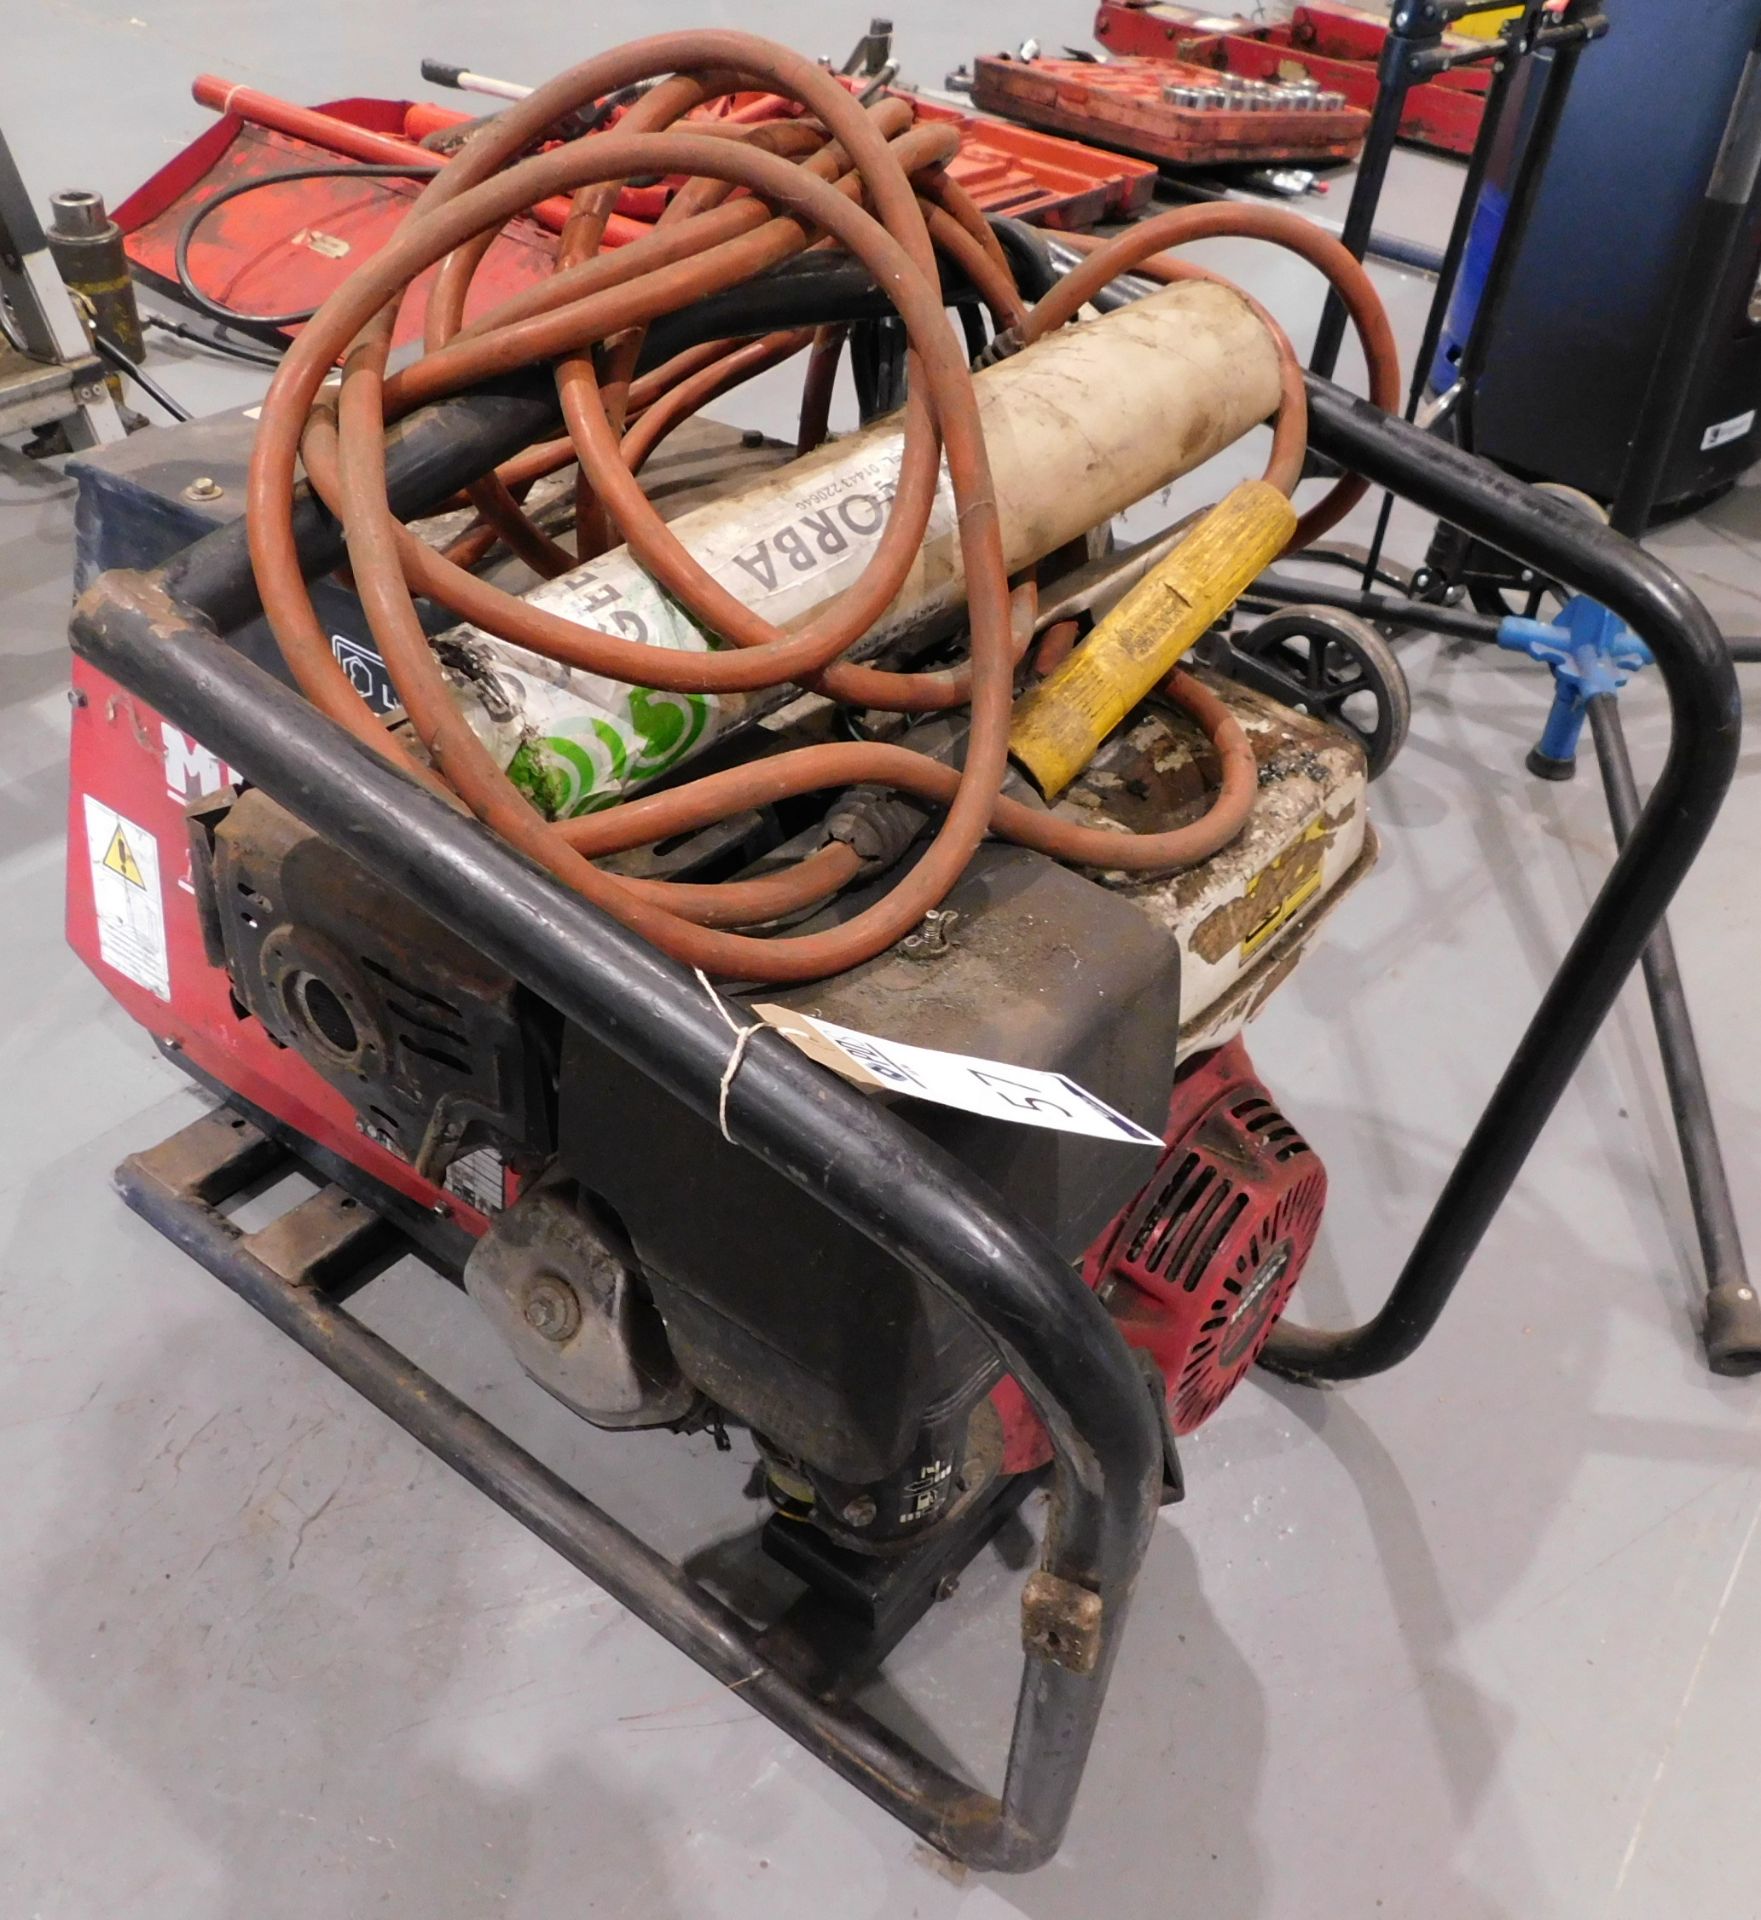 Mosa TS ECO HBS Petrol Driven Welder/Generator with Honda Engine (Located Rugby. Please Refer to